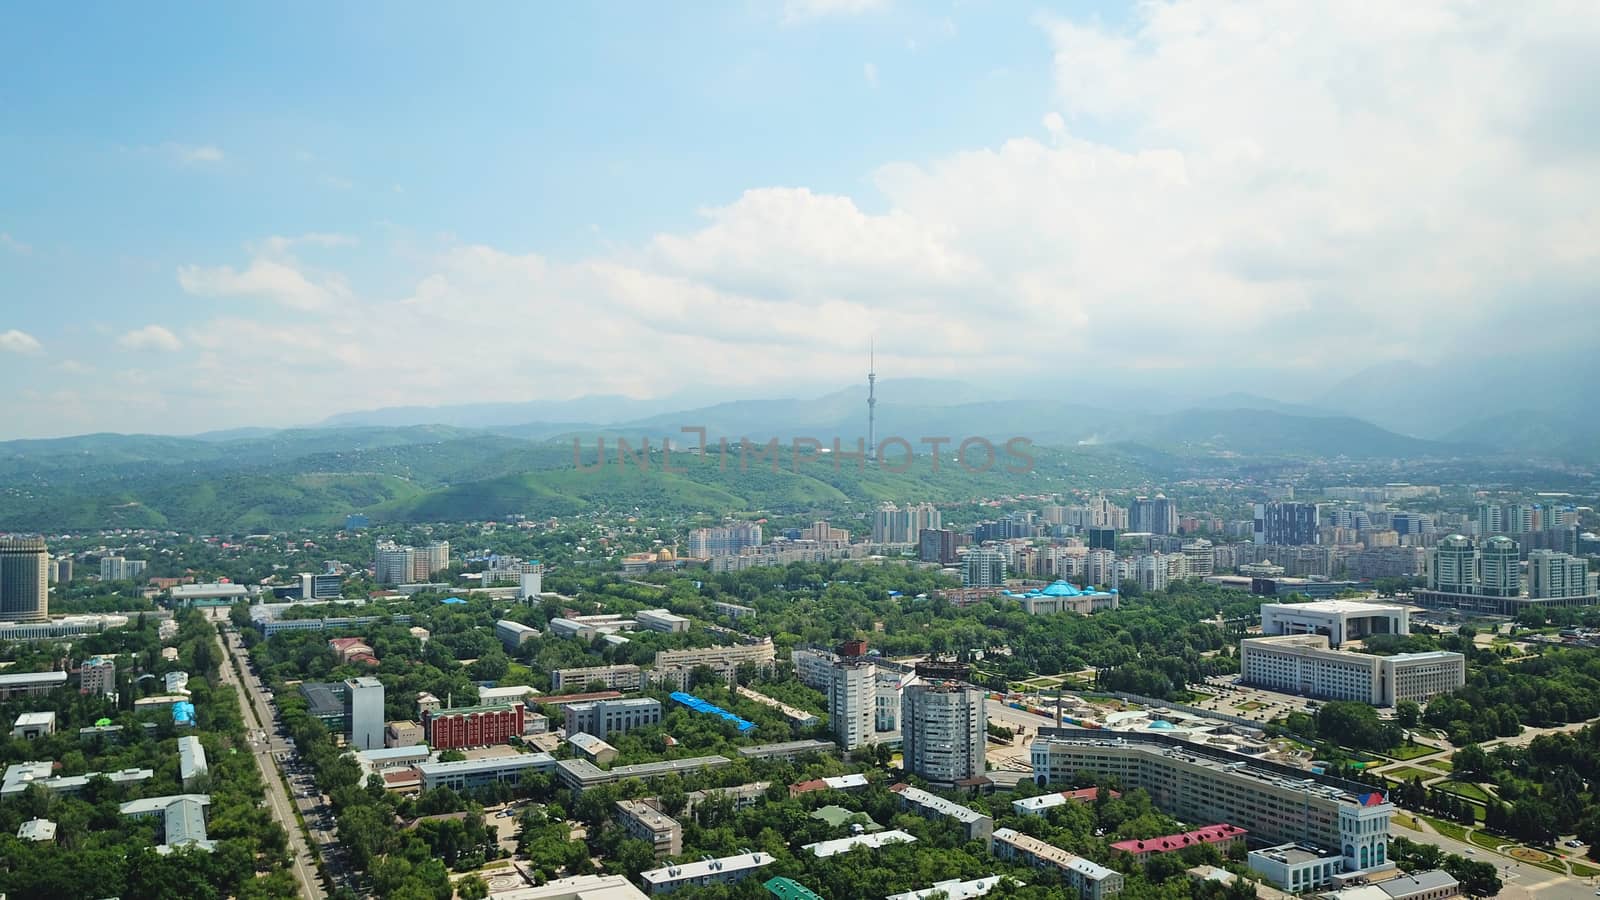 View of Almaty city with white clouds and blue sky. The green city is completely covered with trees, clean roads, transport, houses. On the hill stands the Kok Tobe TV tower. Mountains in the distance